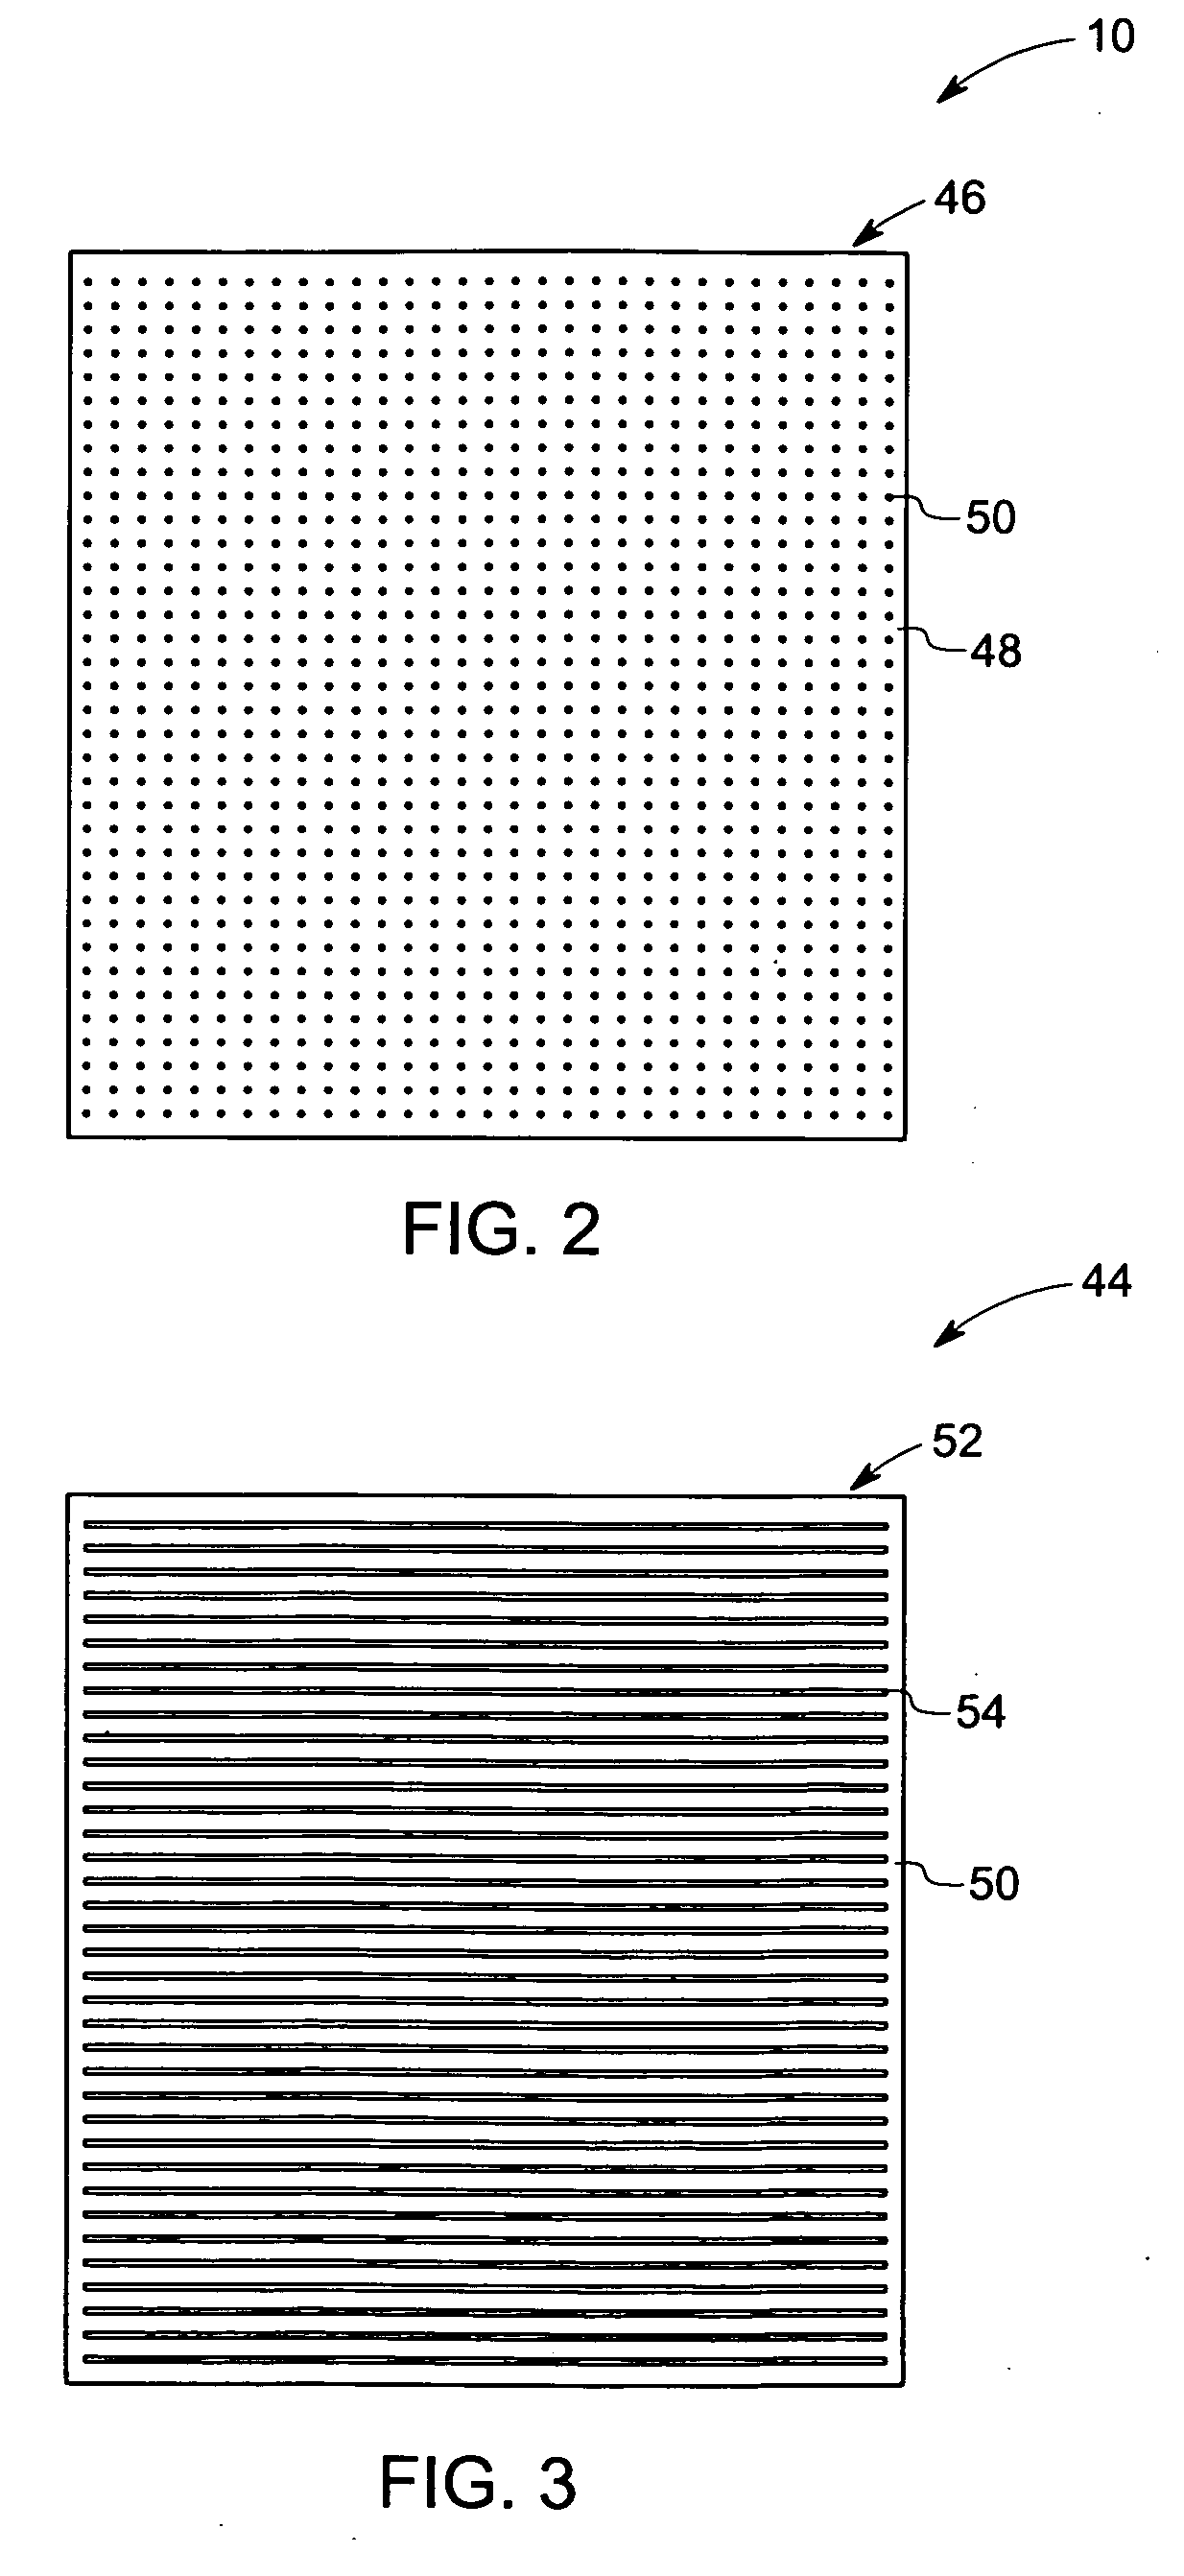 Imaging system and method with scatter correction